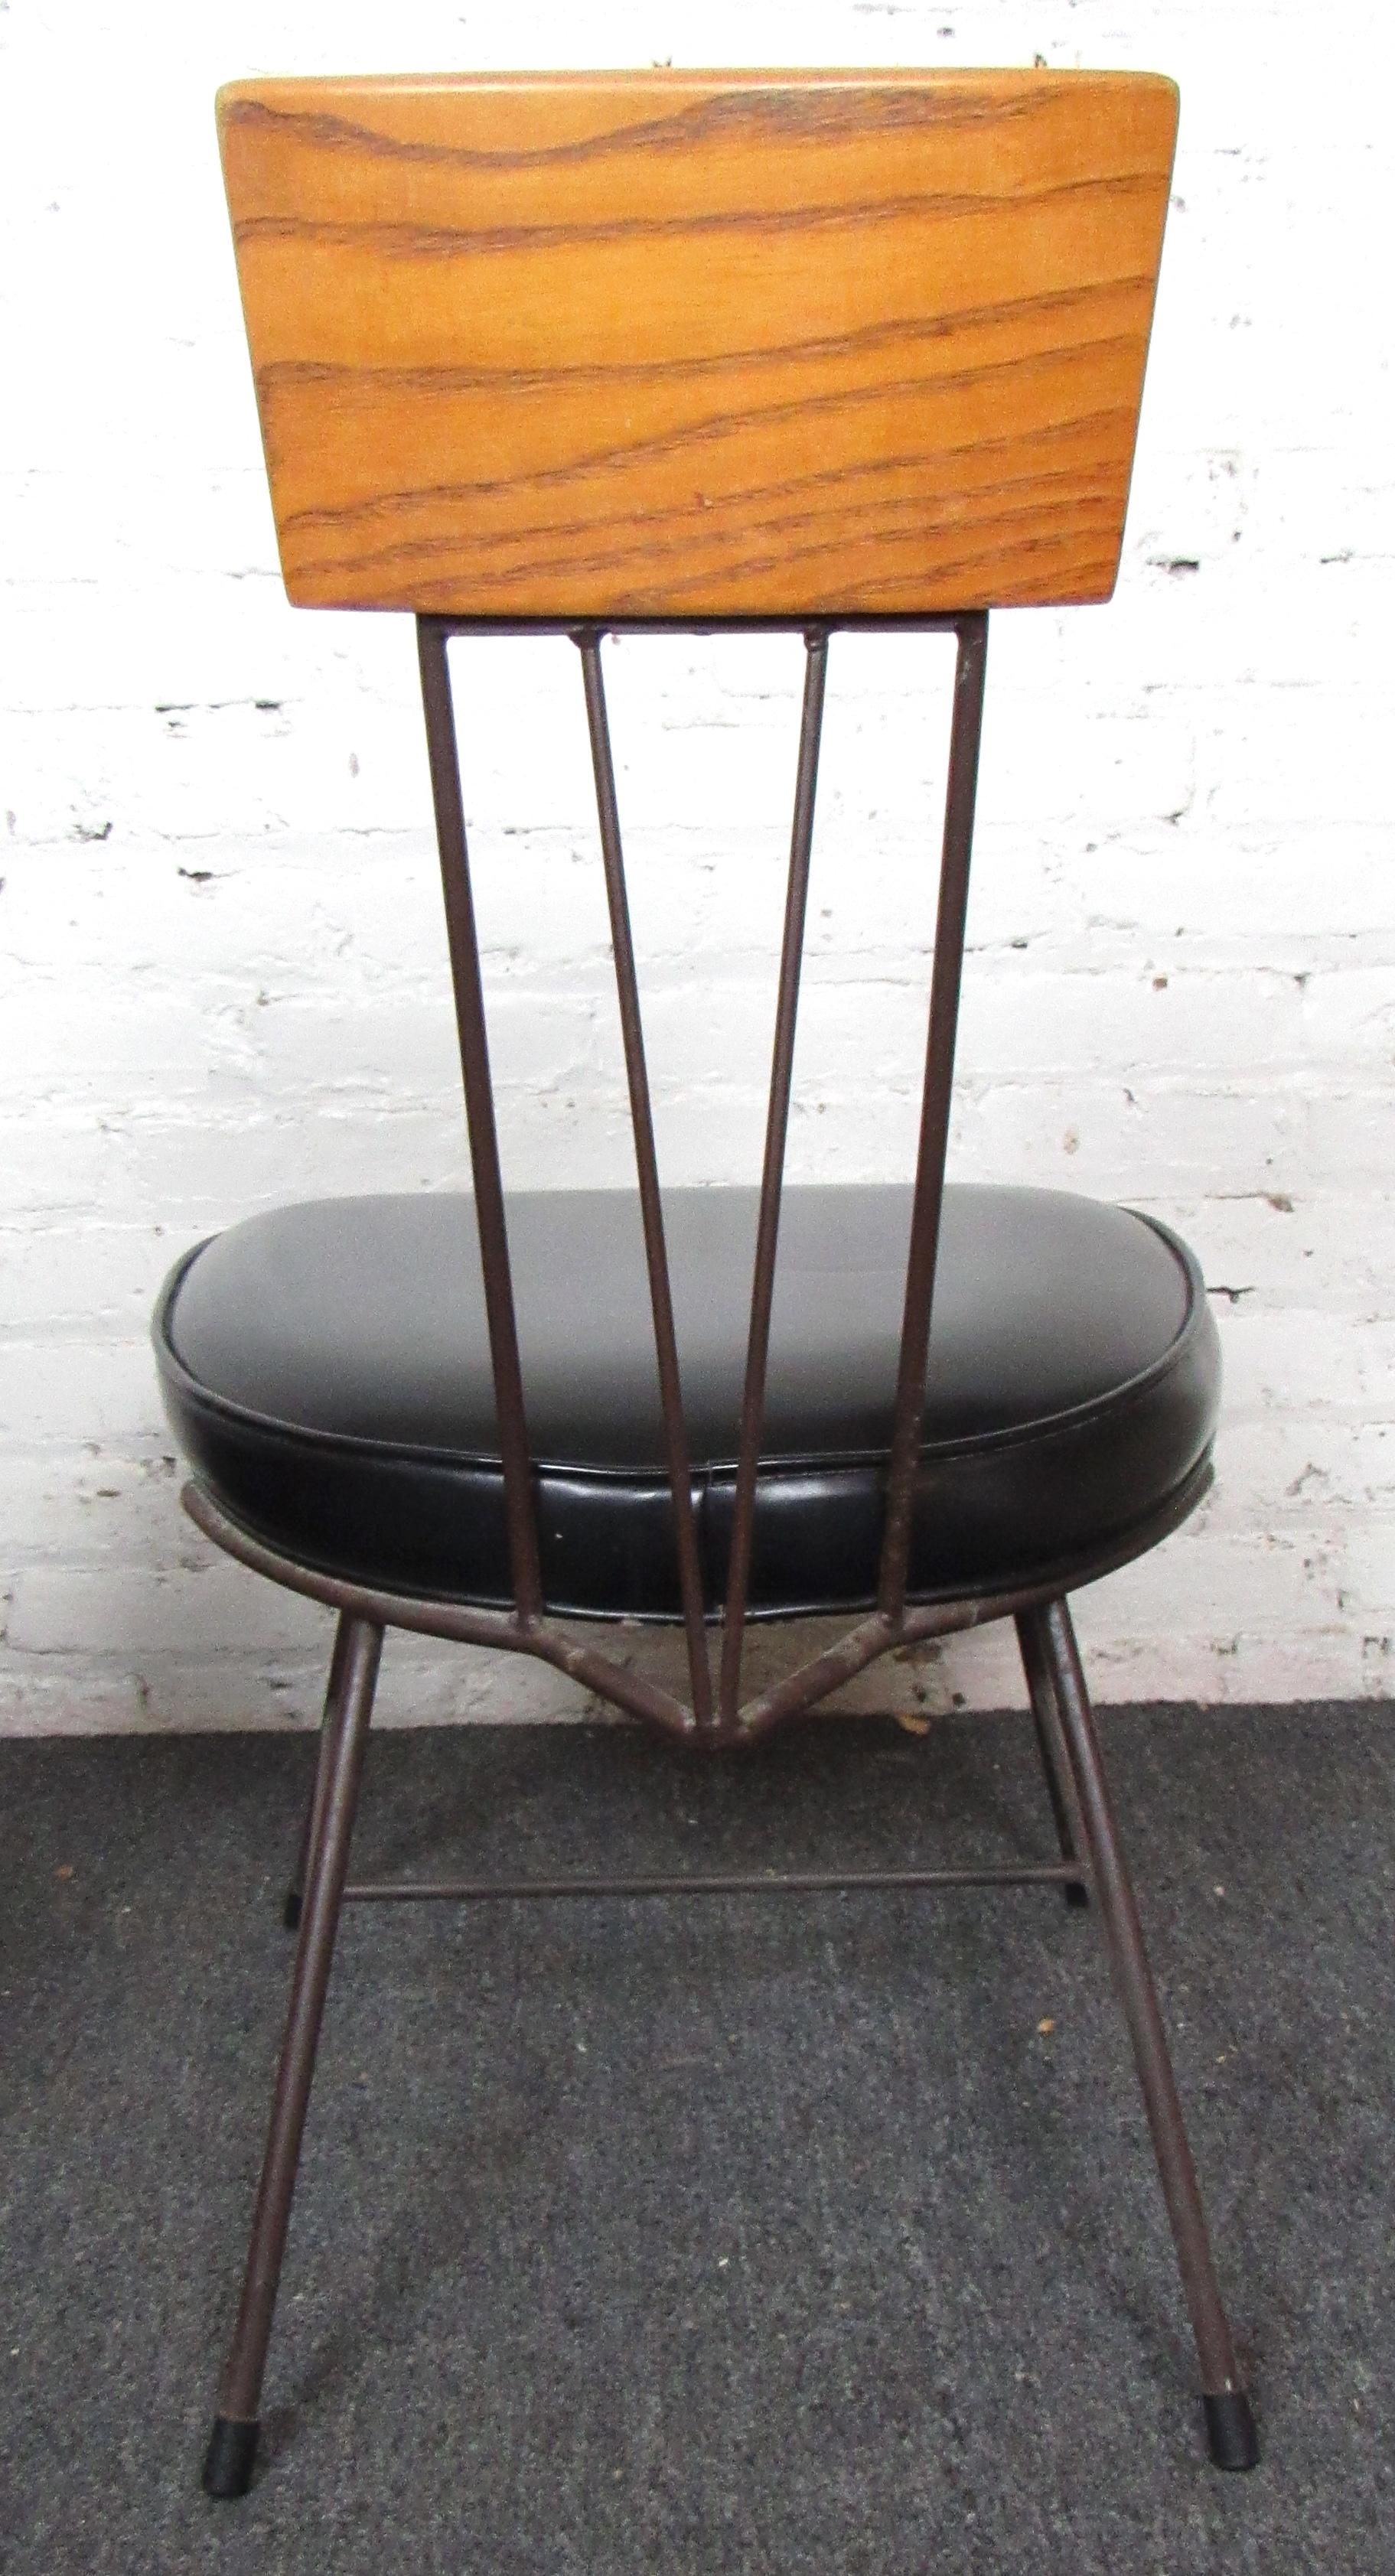 Metal Set of Four Mid-Century Modern Wood & Vinyl Dining Chairs